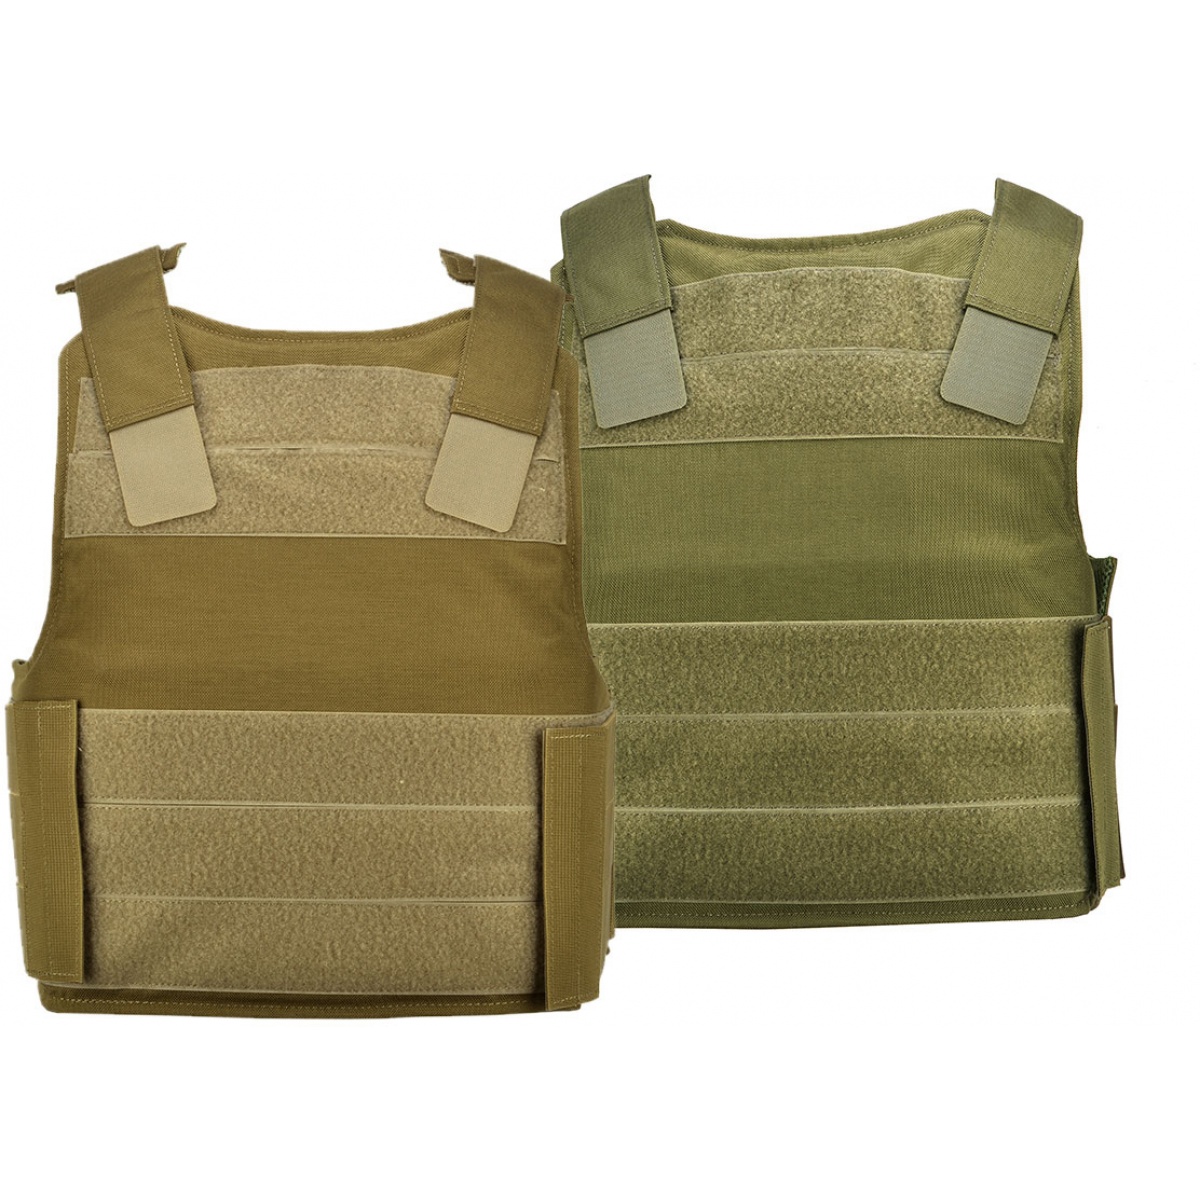 Flyye Industries 1000D Tactical SVS Personal Body Armor | Airsoft